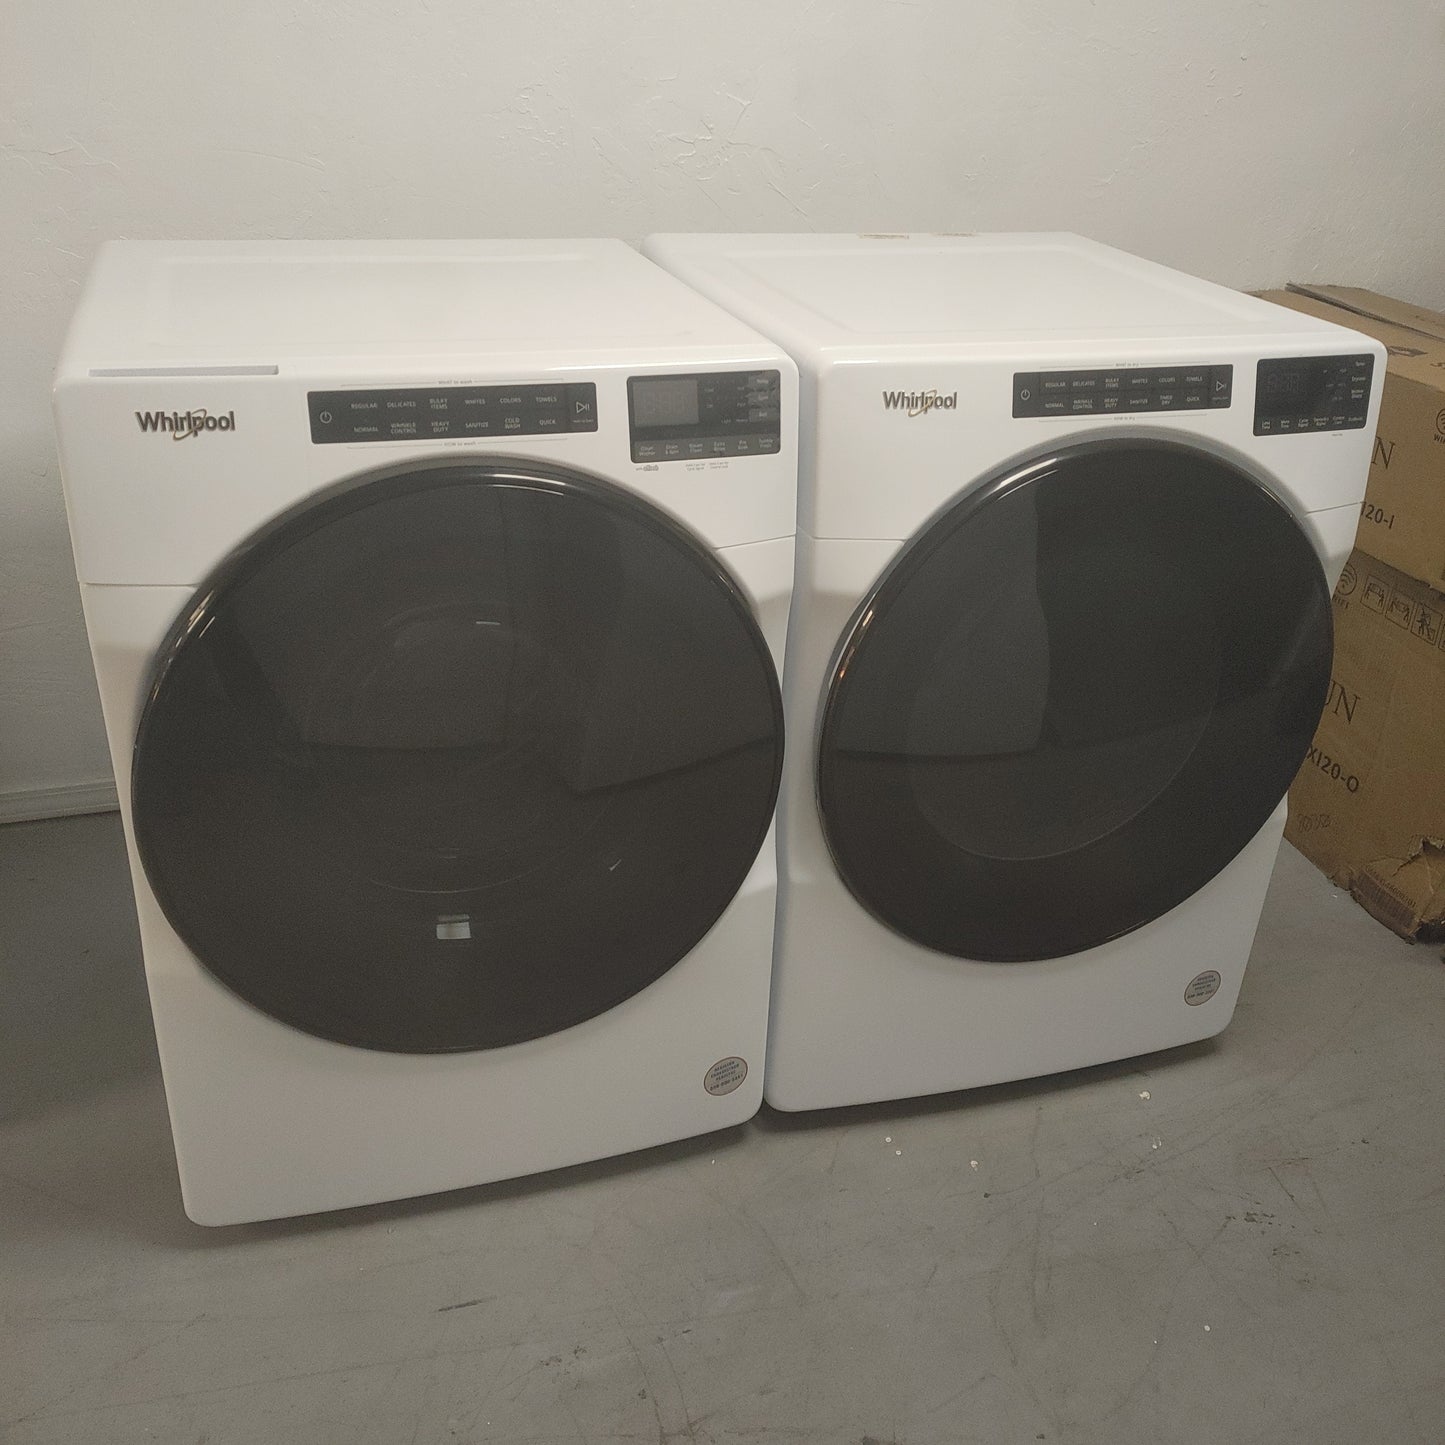 New Whirlpool 4.5 cubic ft Front Load Washer and 7.4 cubic ft stackable Electric Dryer Set